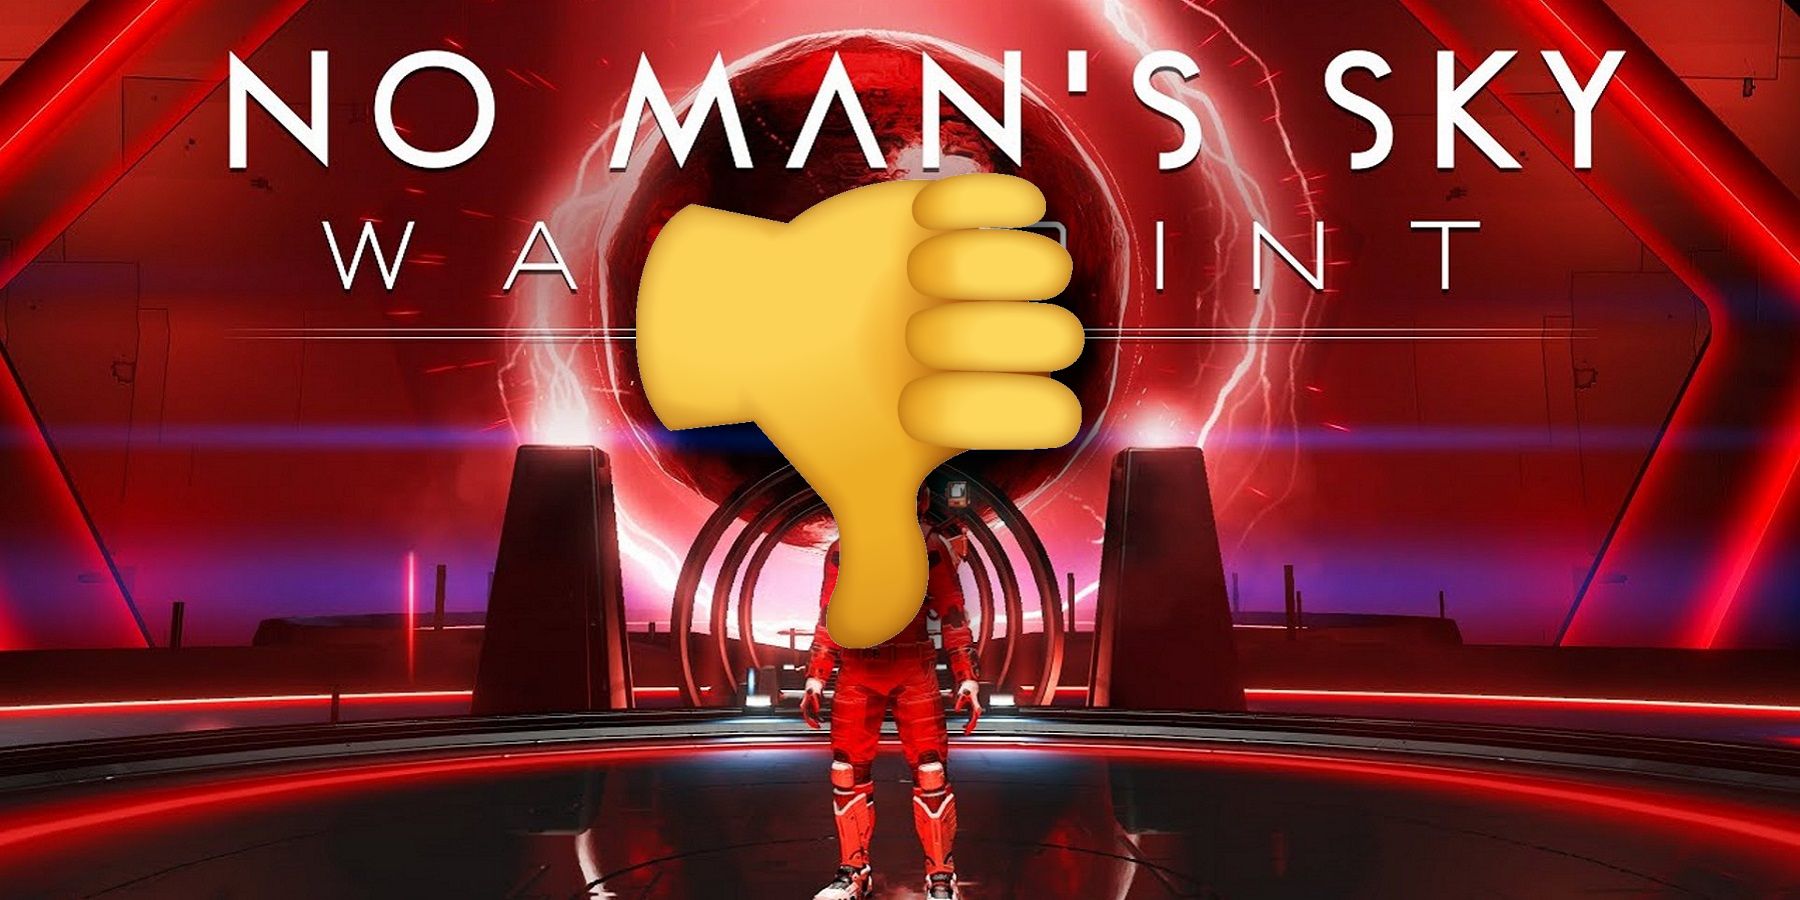 A red image from No Man's Sky showing the Traveller, with a giant thumbs down in the center.